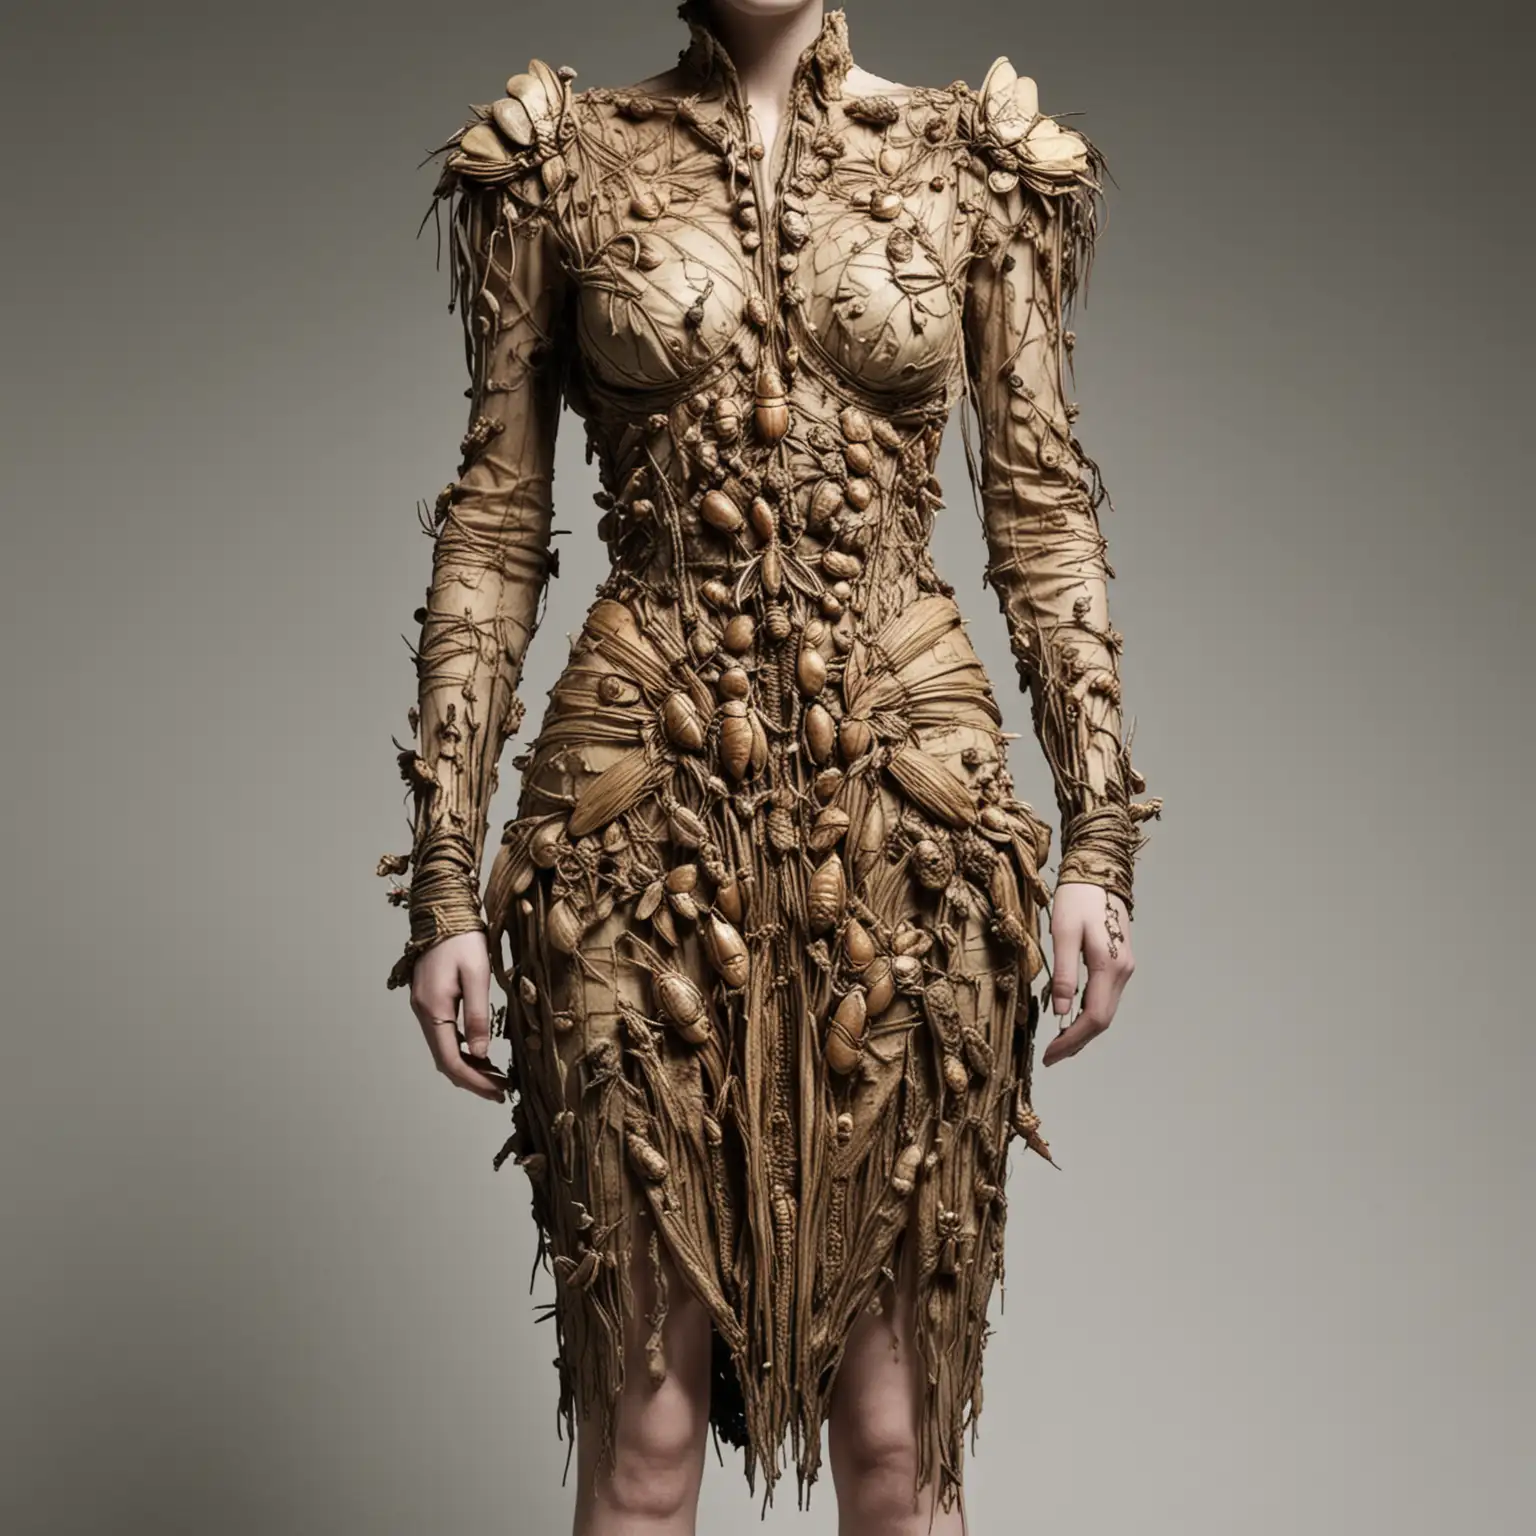 Alexander McQueen Inspired Withered Insect Dress